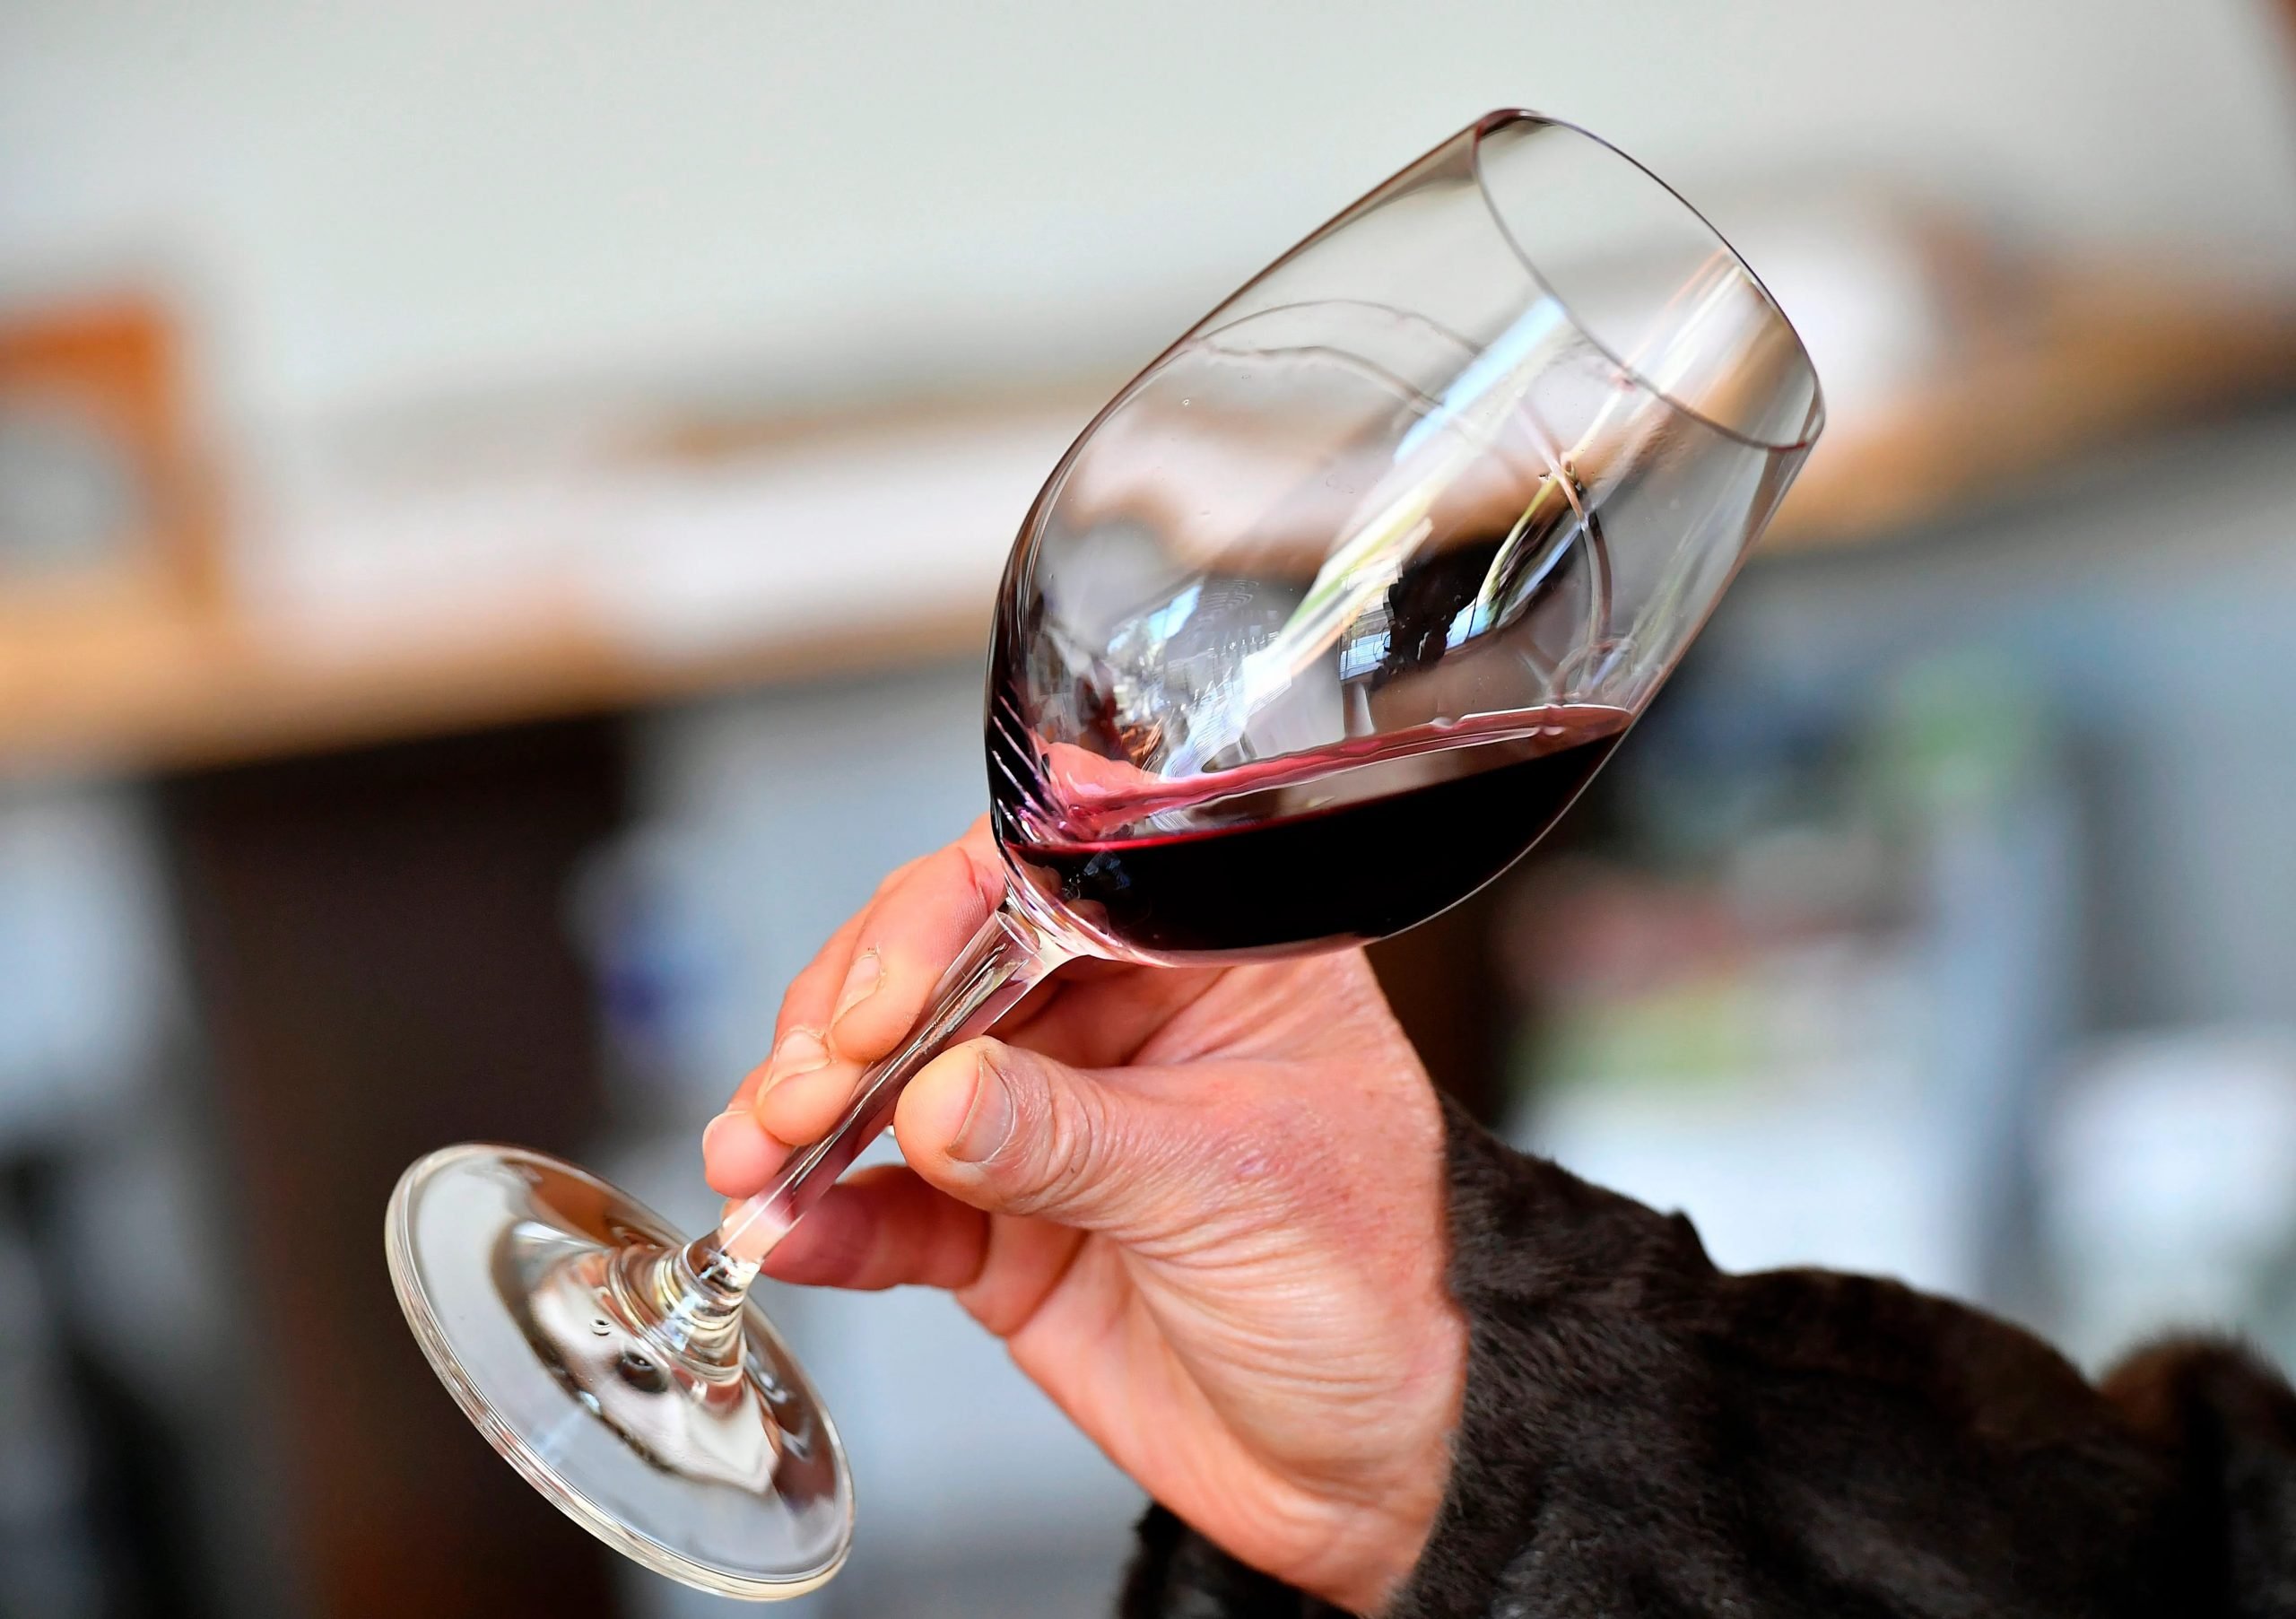 How you can feel really good about buying really bad wine